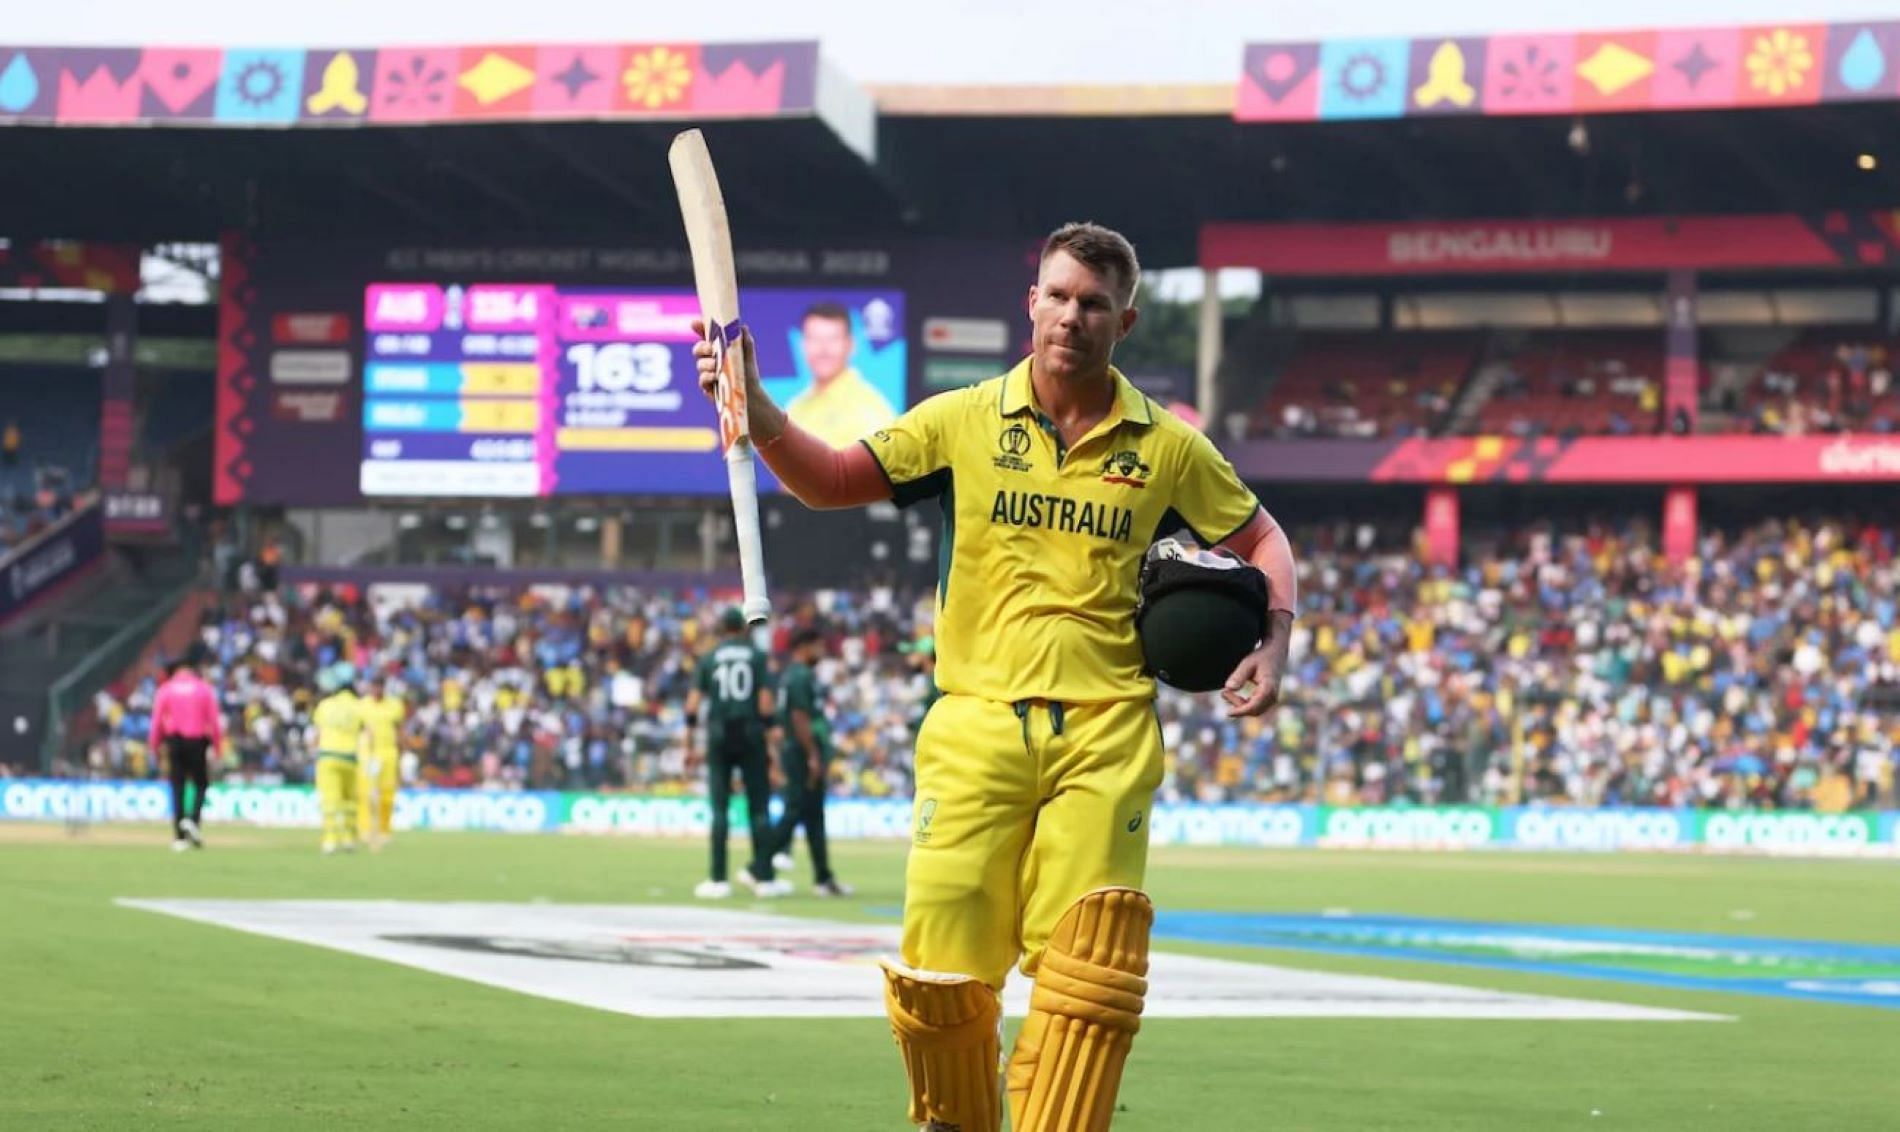 Warner thrilled the Bangalore fans with an incredible 163 against Pakistan